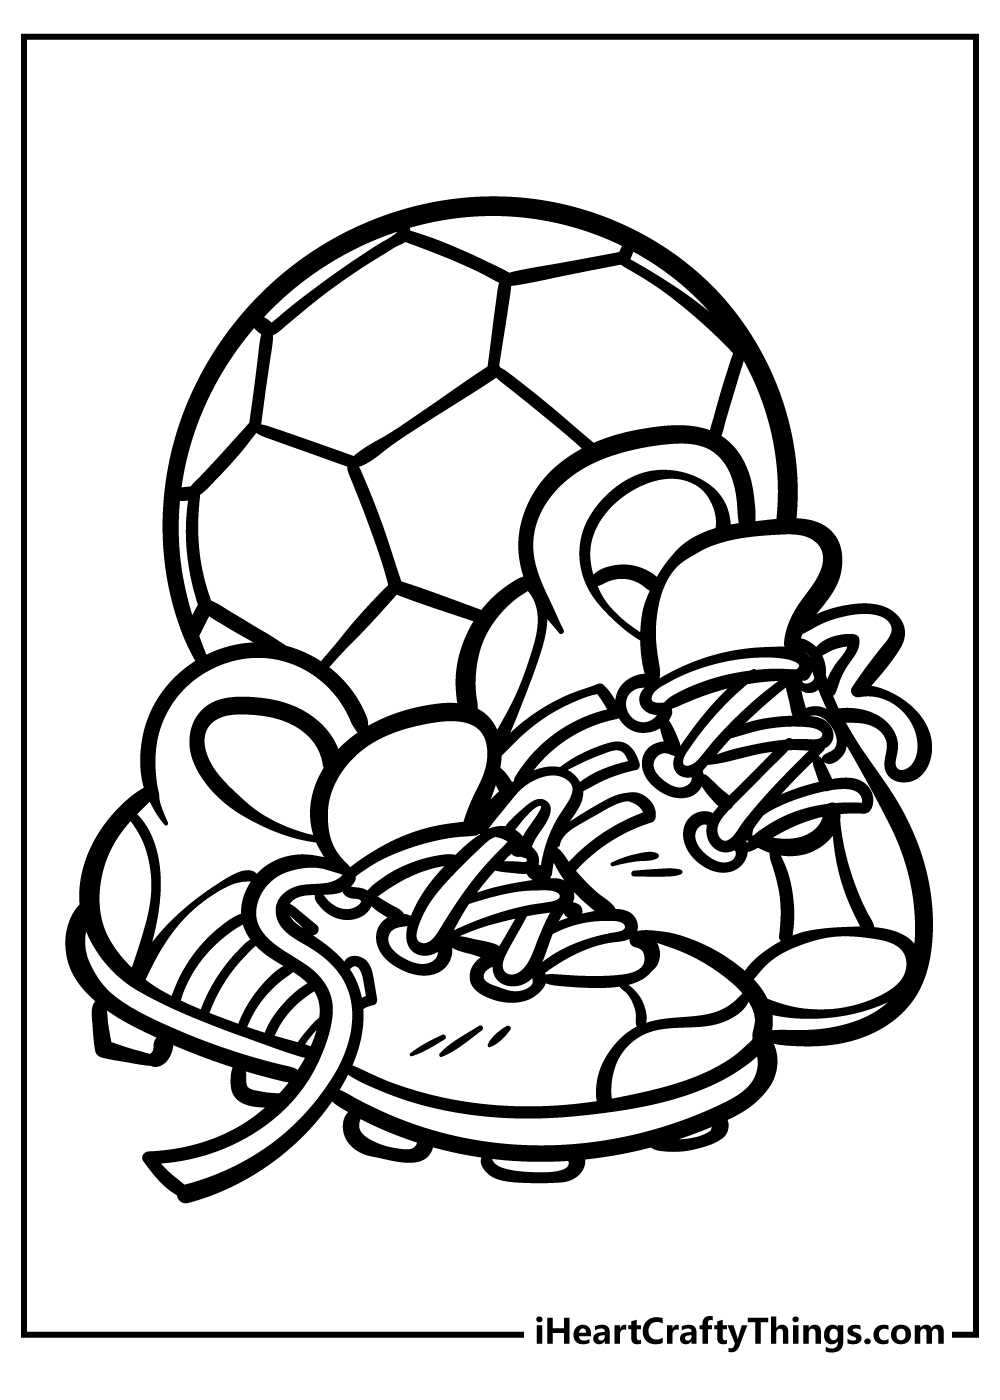 Football Coloring Pages for preschoolers free printable